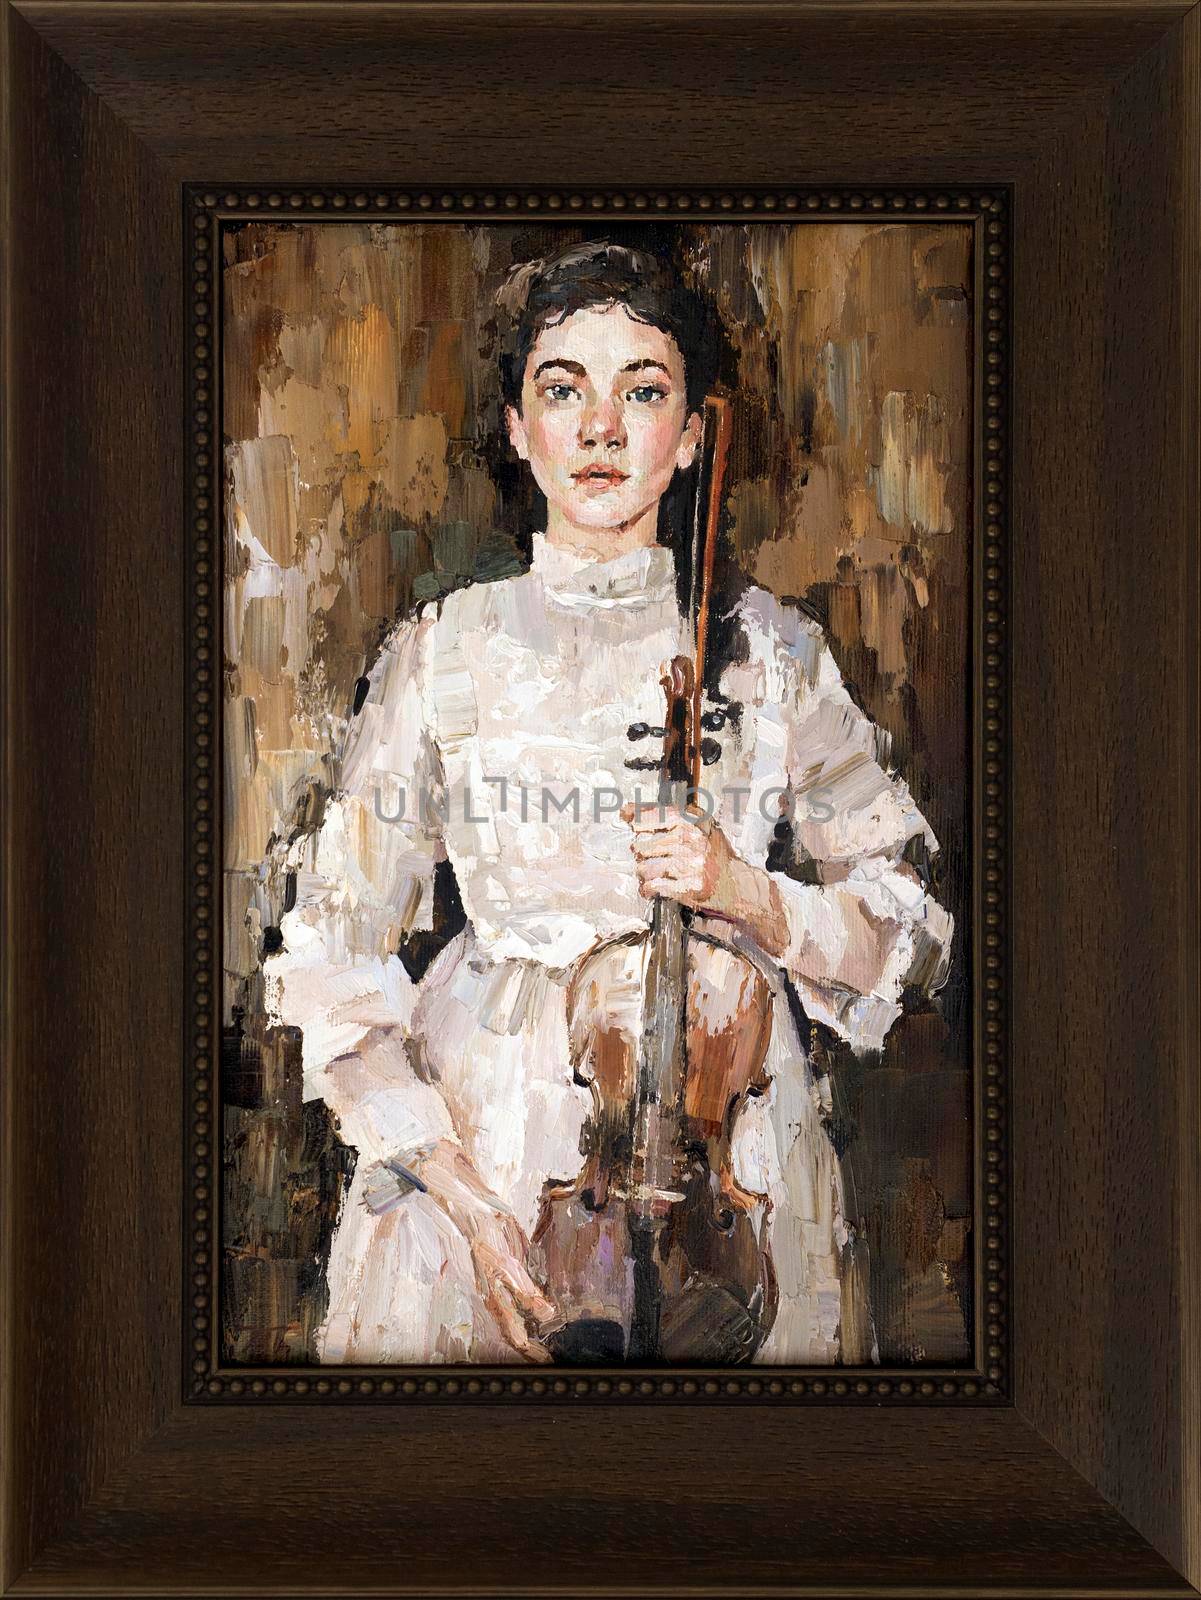 Framed girl in a white dress holding a violin in her hands. Palette knife technique of oil painting and brush.